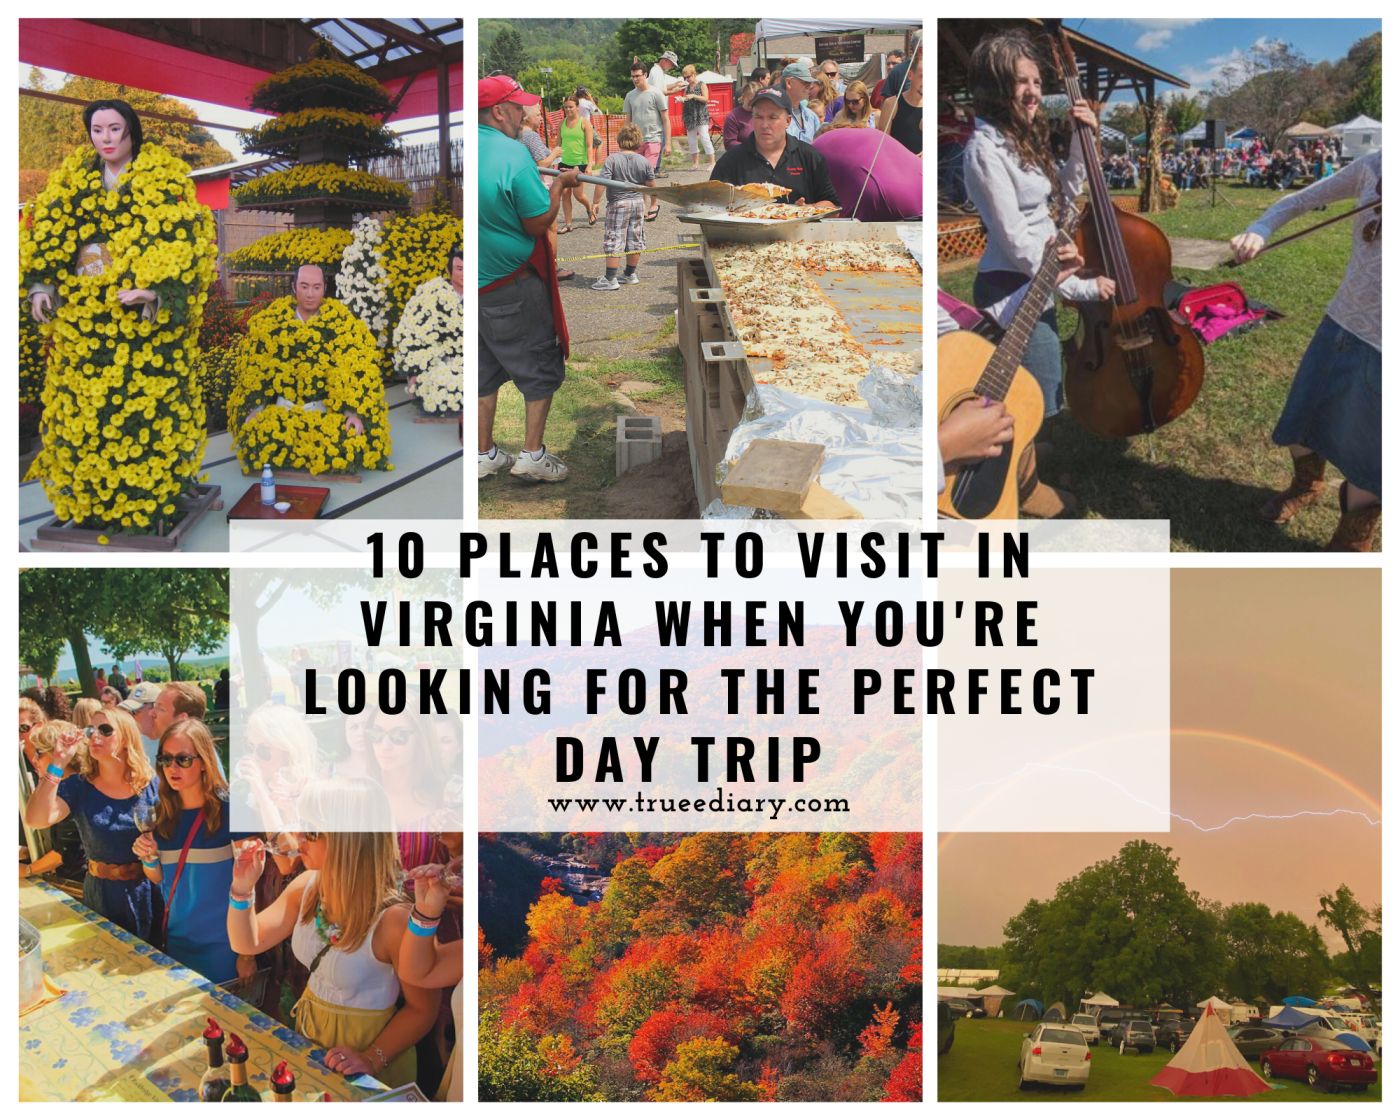 10 Places to Visit in Virginia When You're Looking for the Perfect Day Trip